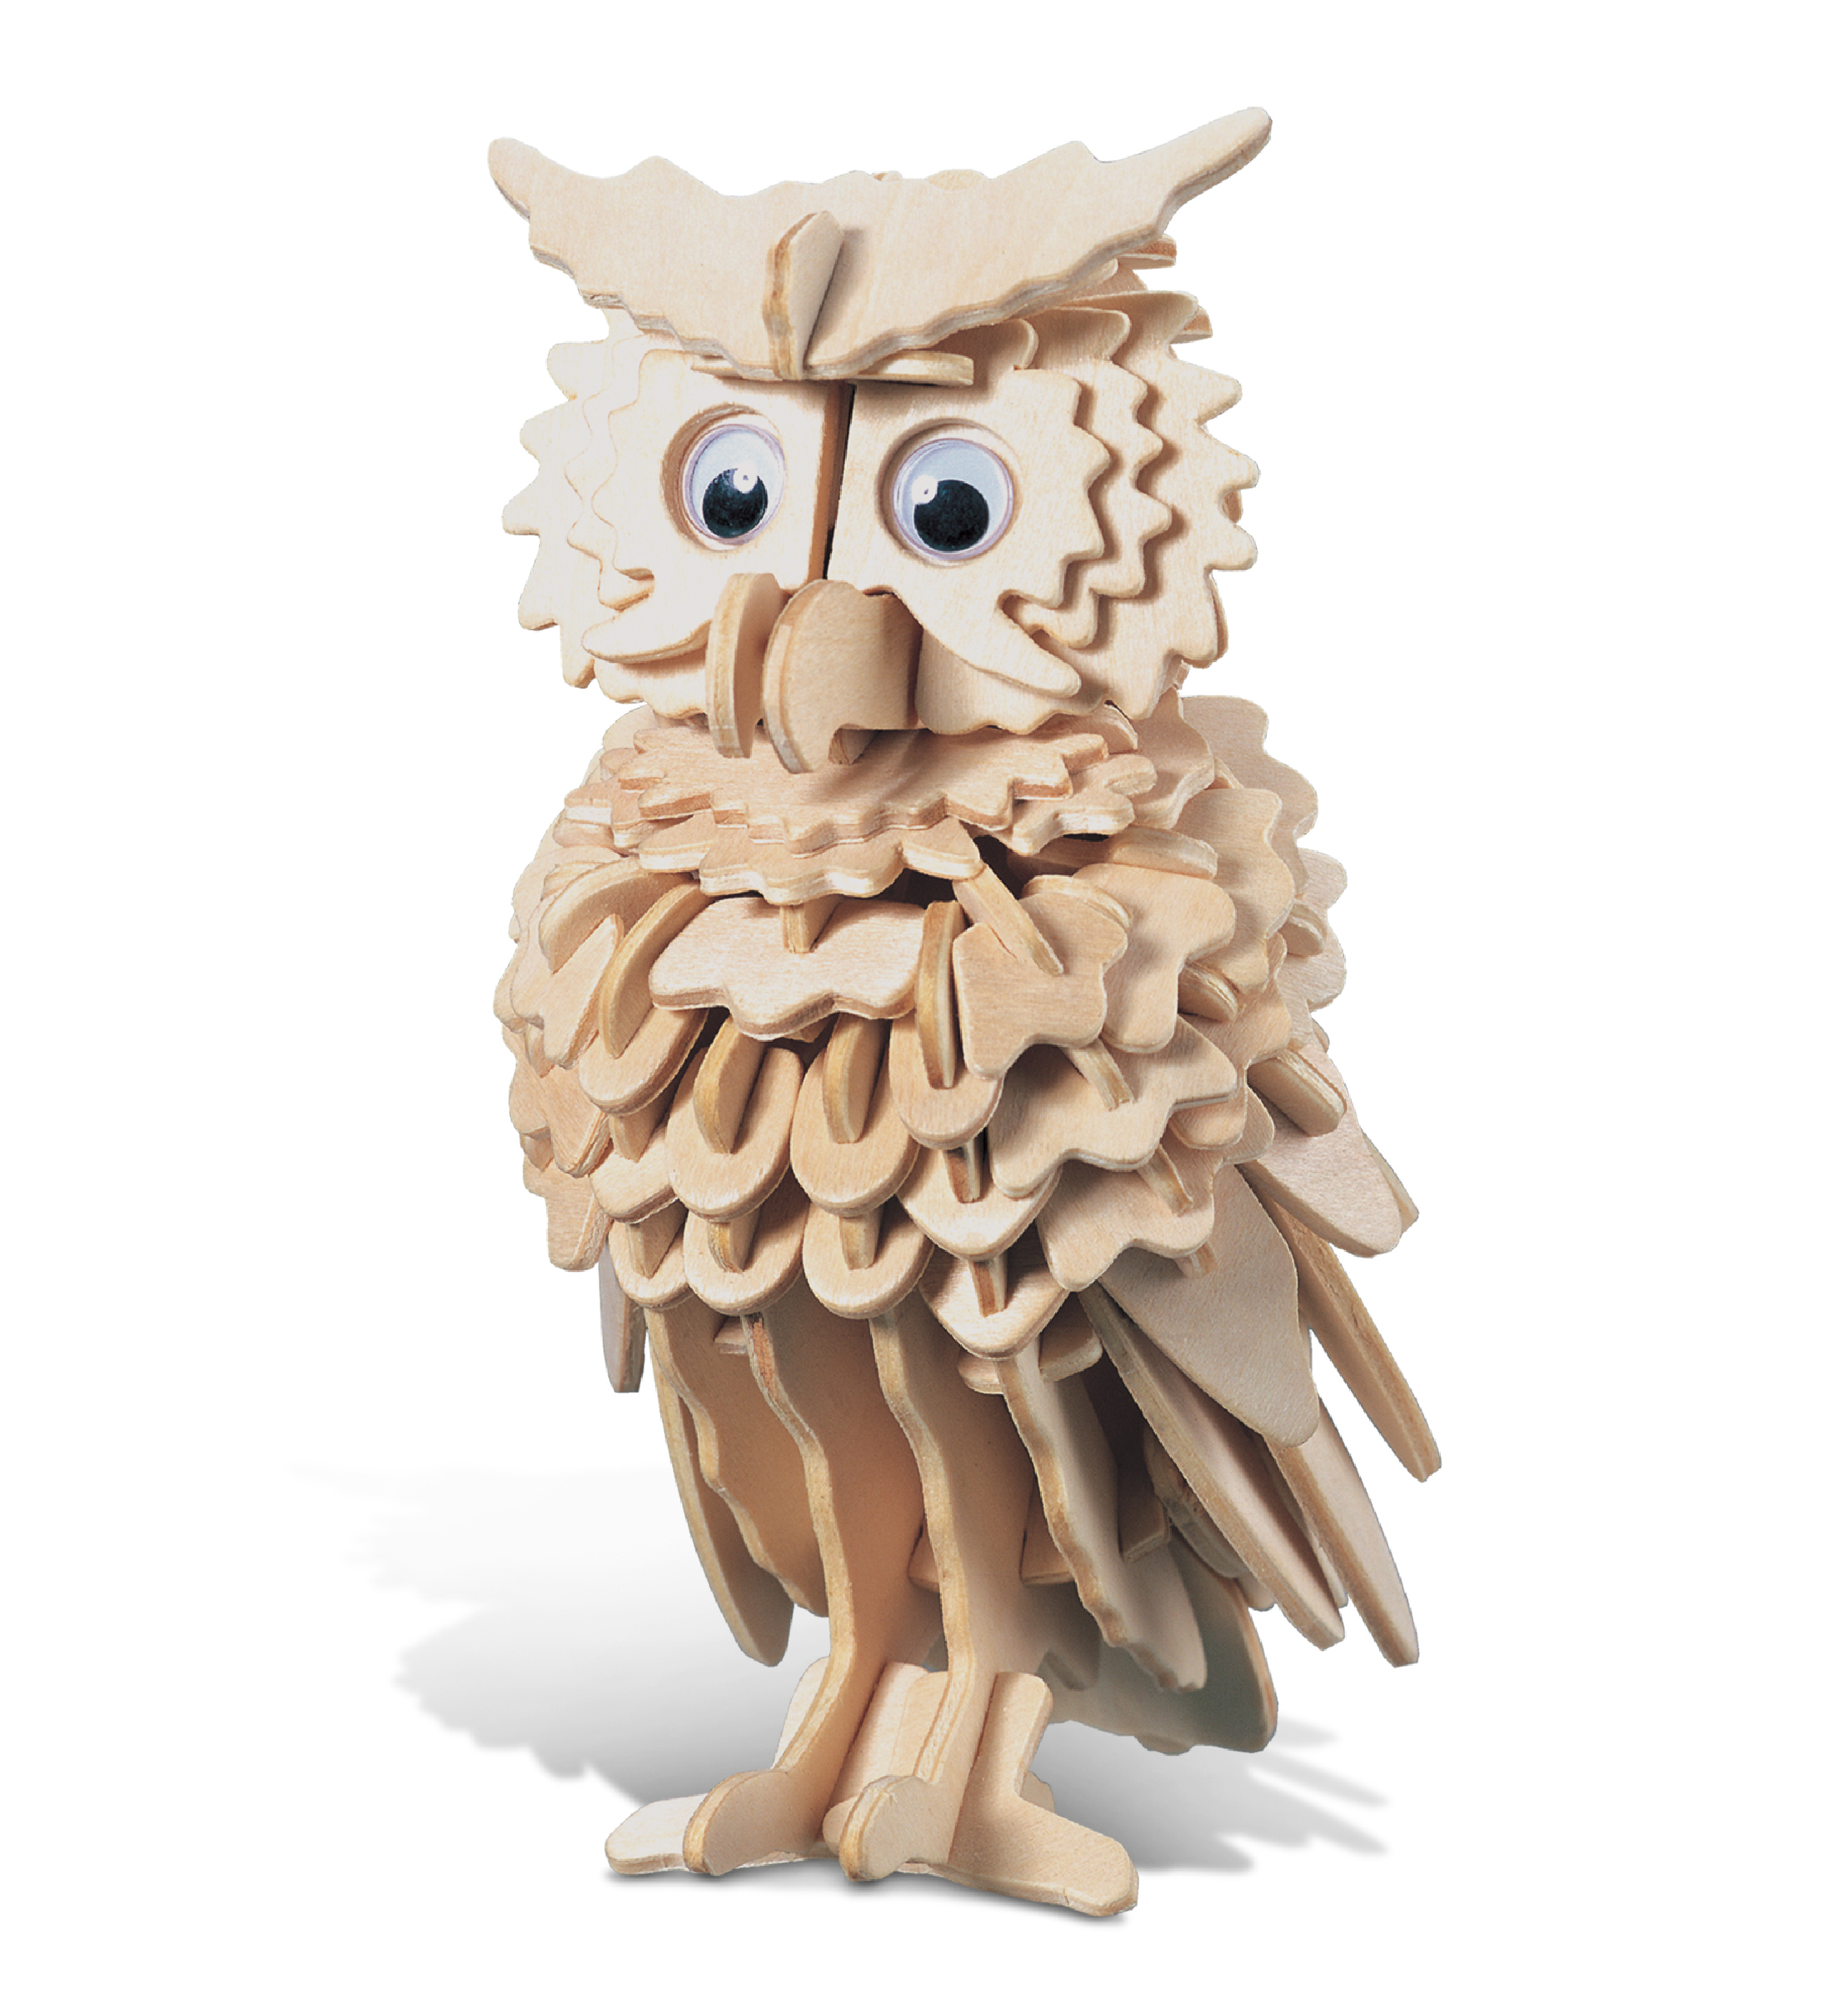 Buy Puzzled 3D Owl Wood Craft Jigsaw Puzzle Construction Kit - No Edges  Irregular Laser Cut Unique Wooden Bird Model - Brain Teaser Animal Figure  Discovery Learning Toys Kids Adults Gifts -